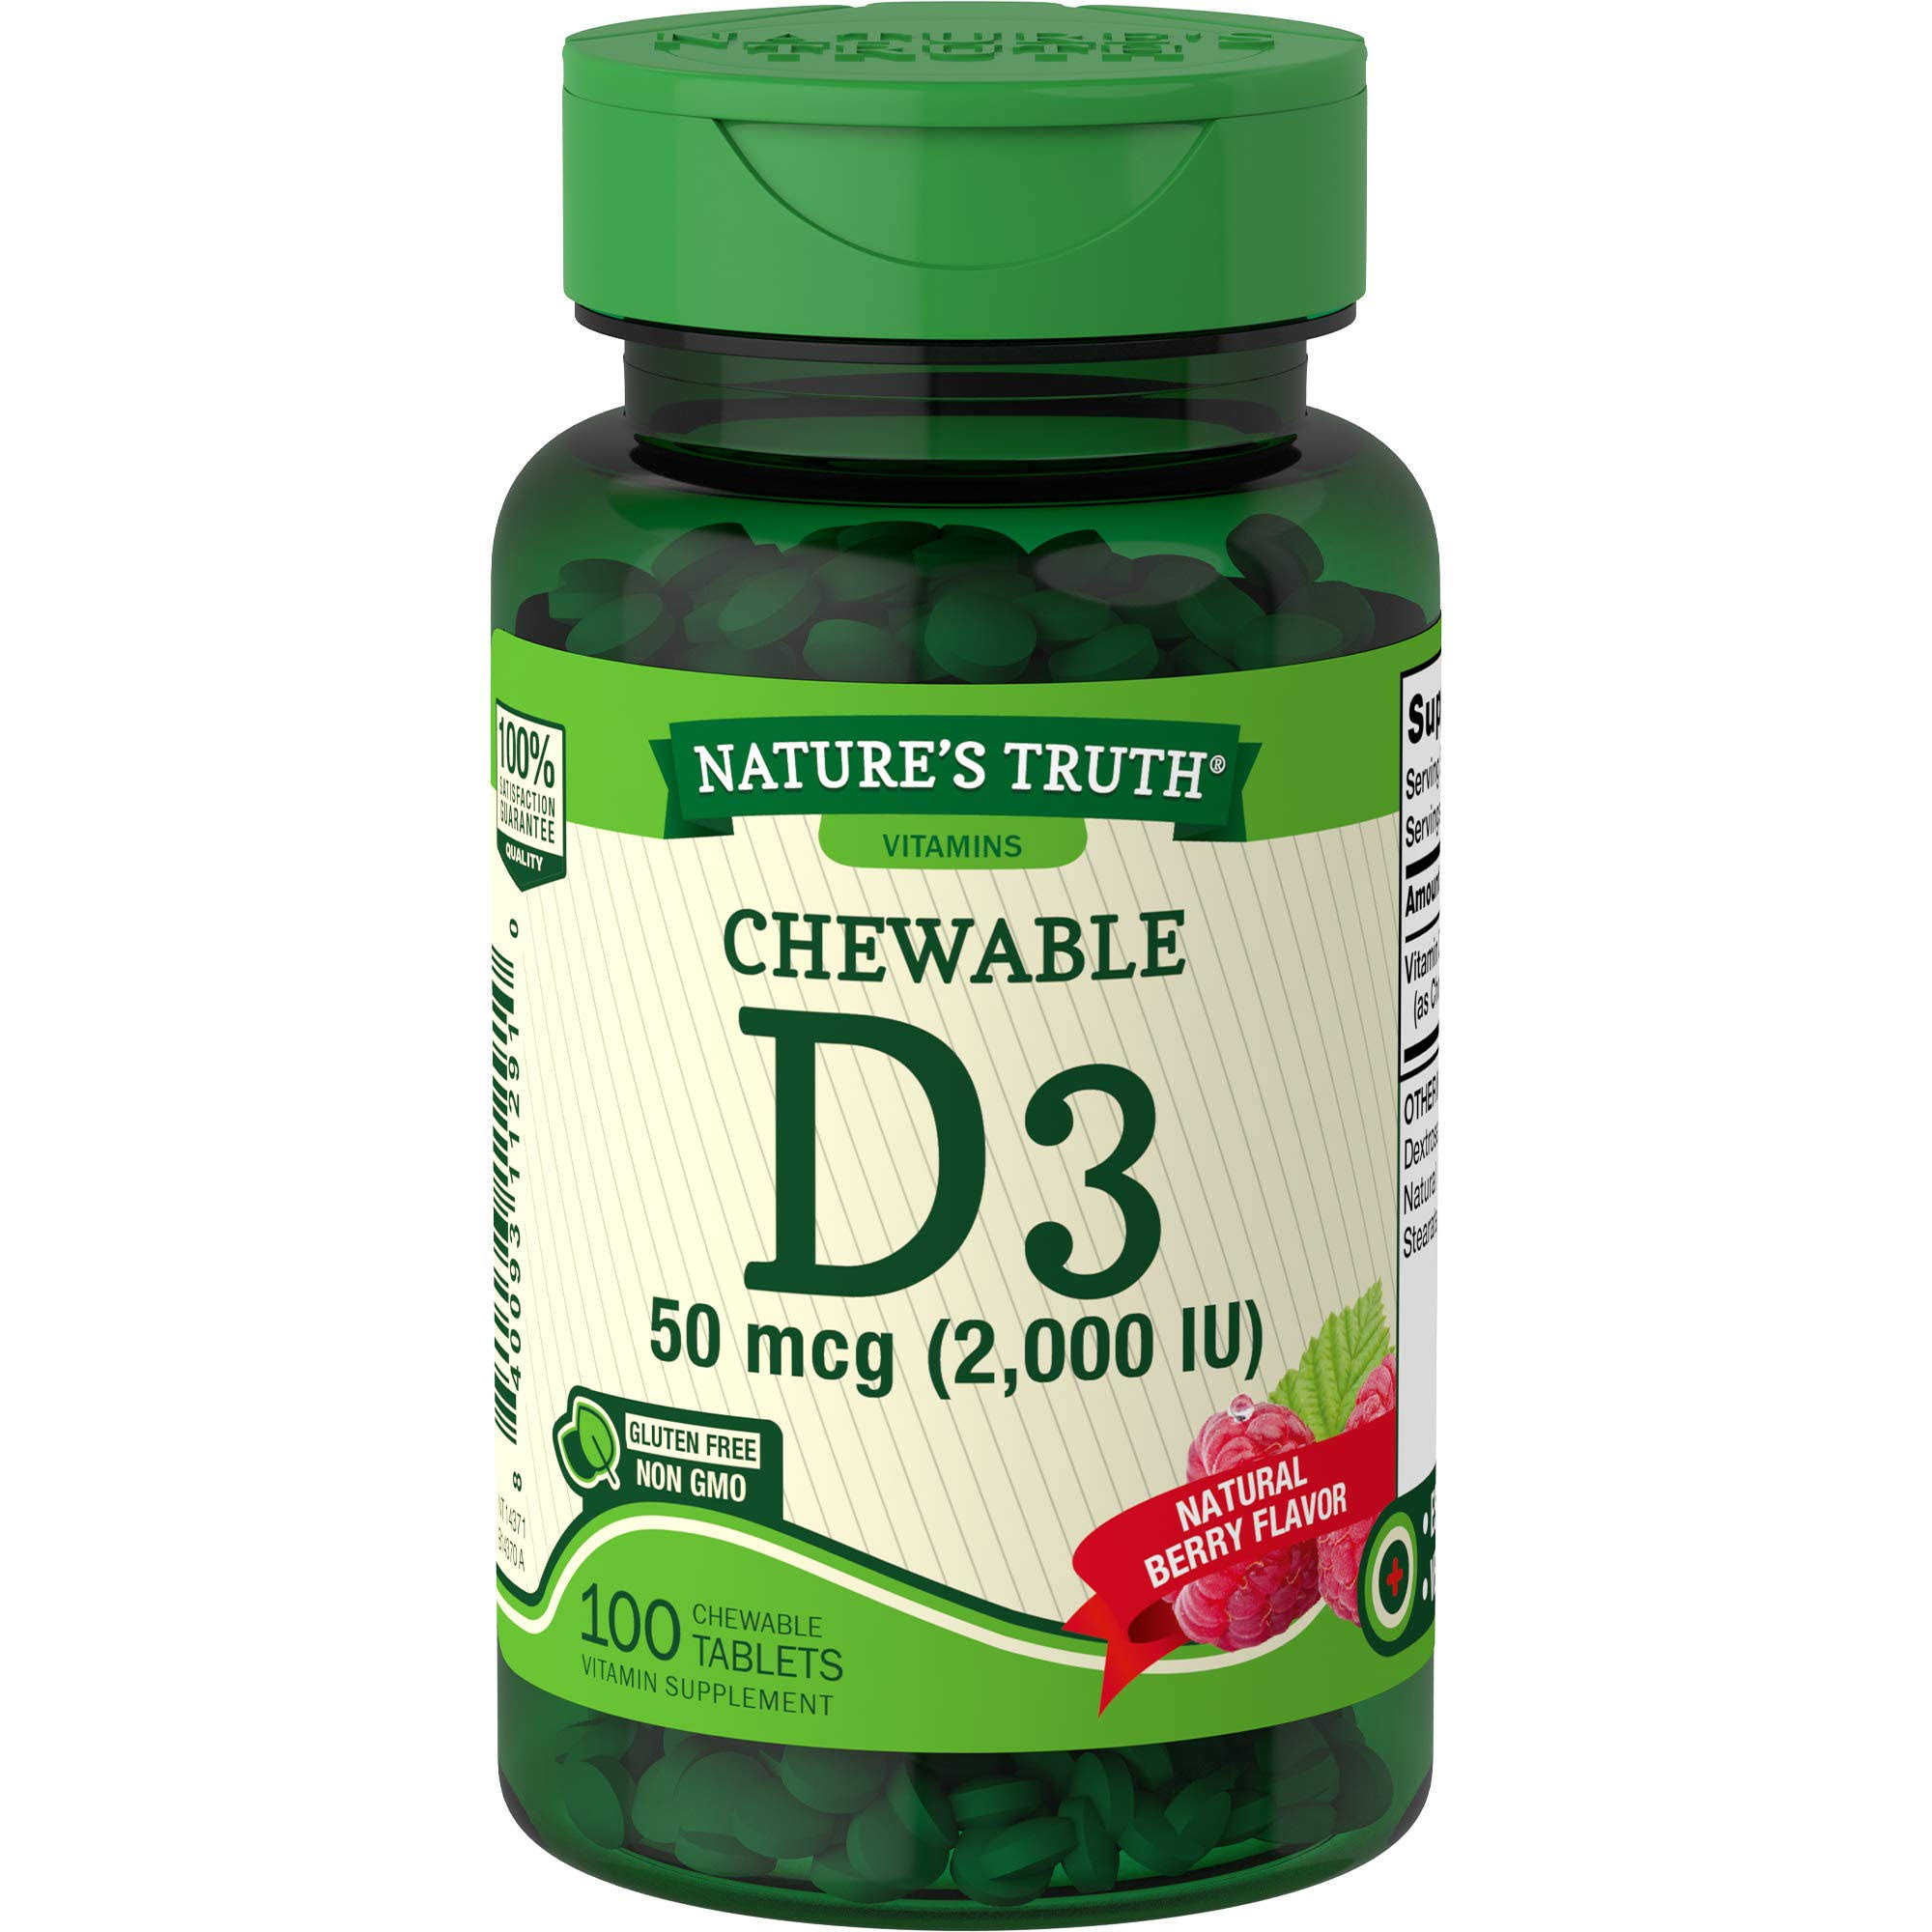 Chewable Vitamin D3 2000 IU - 100 Tablets - Nature's Truth UK